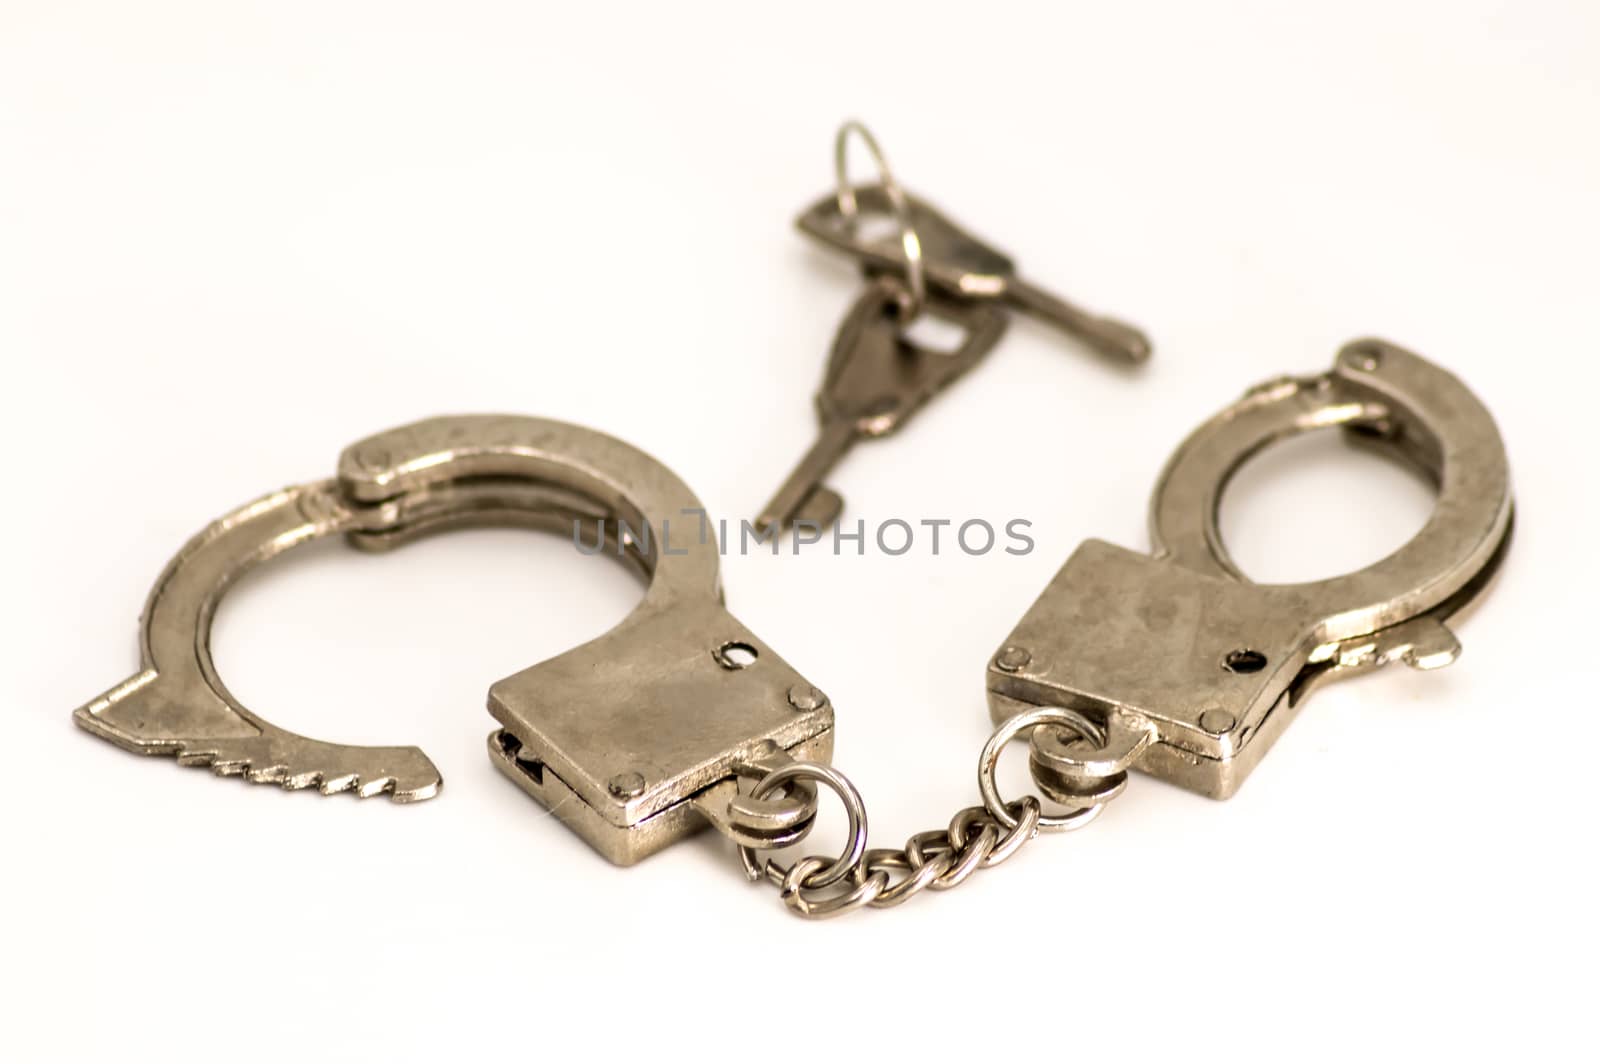 Pair of handcuffs close up front view  by Philou1000